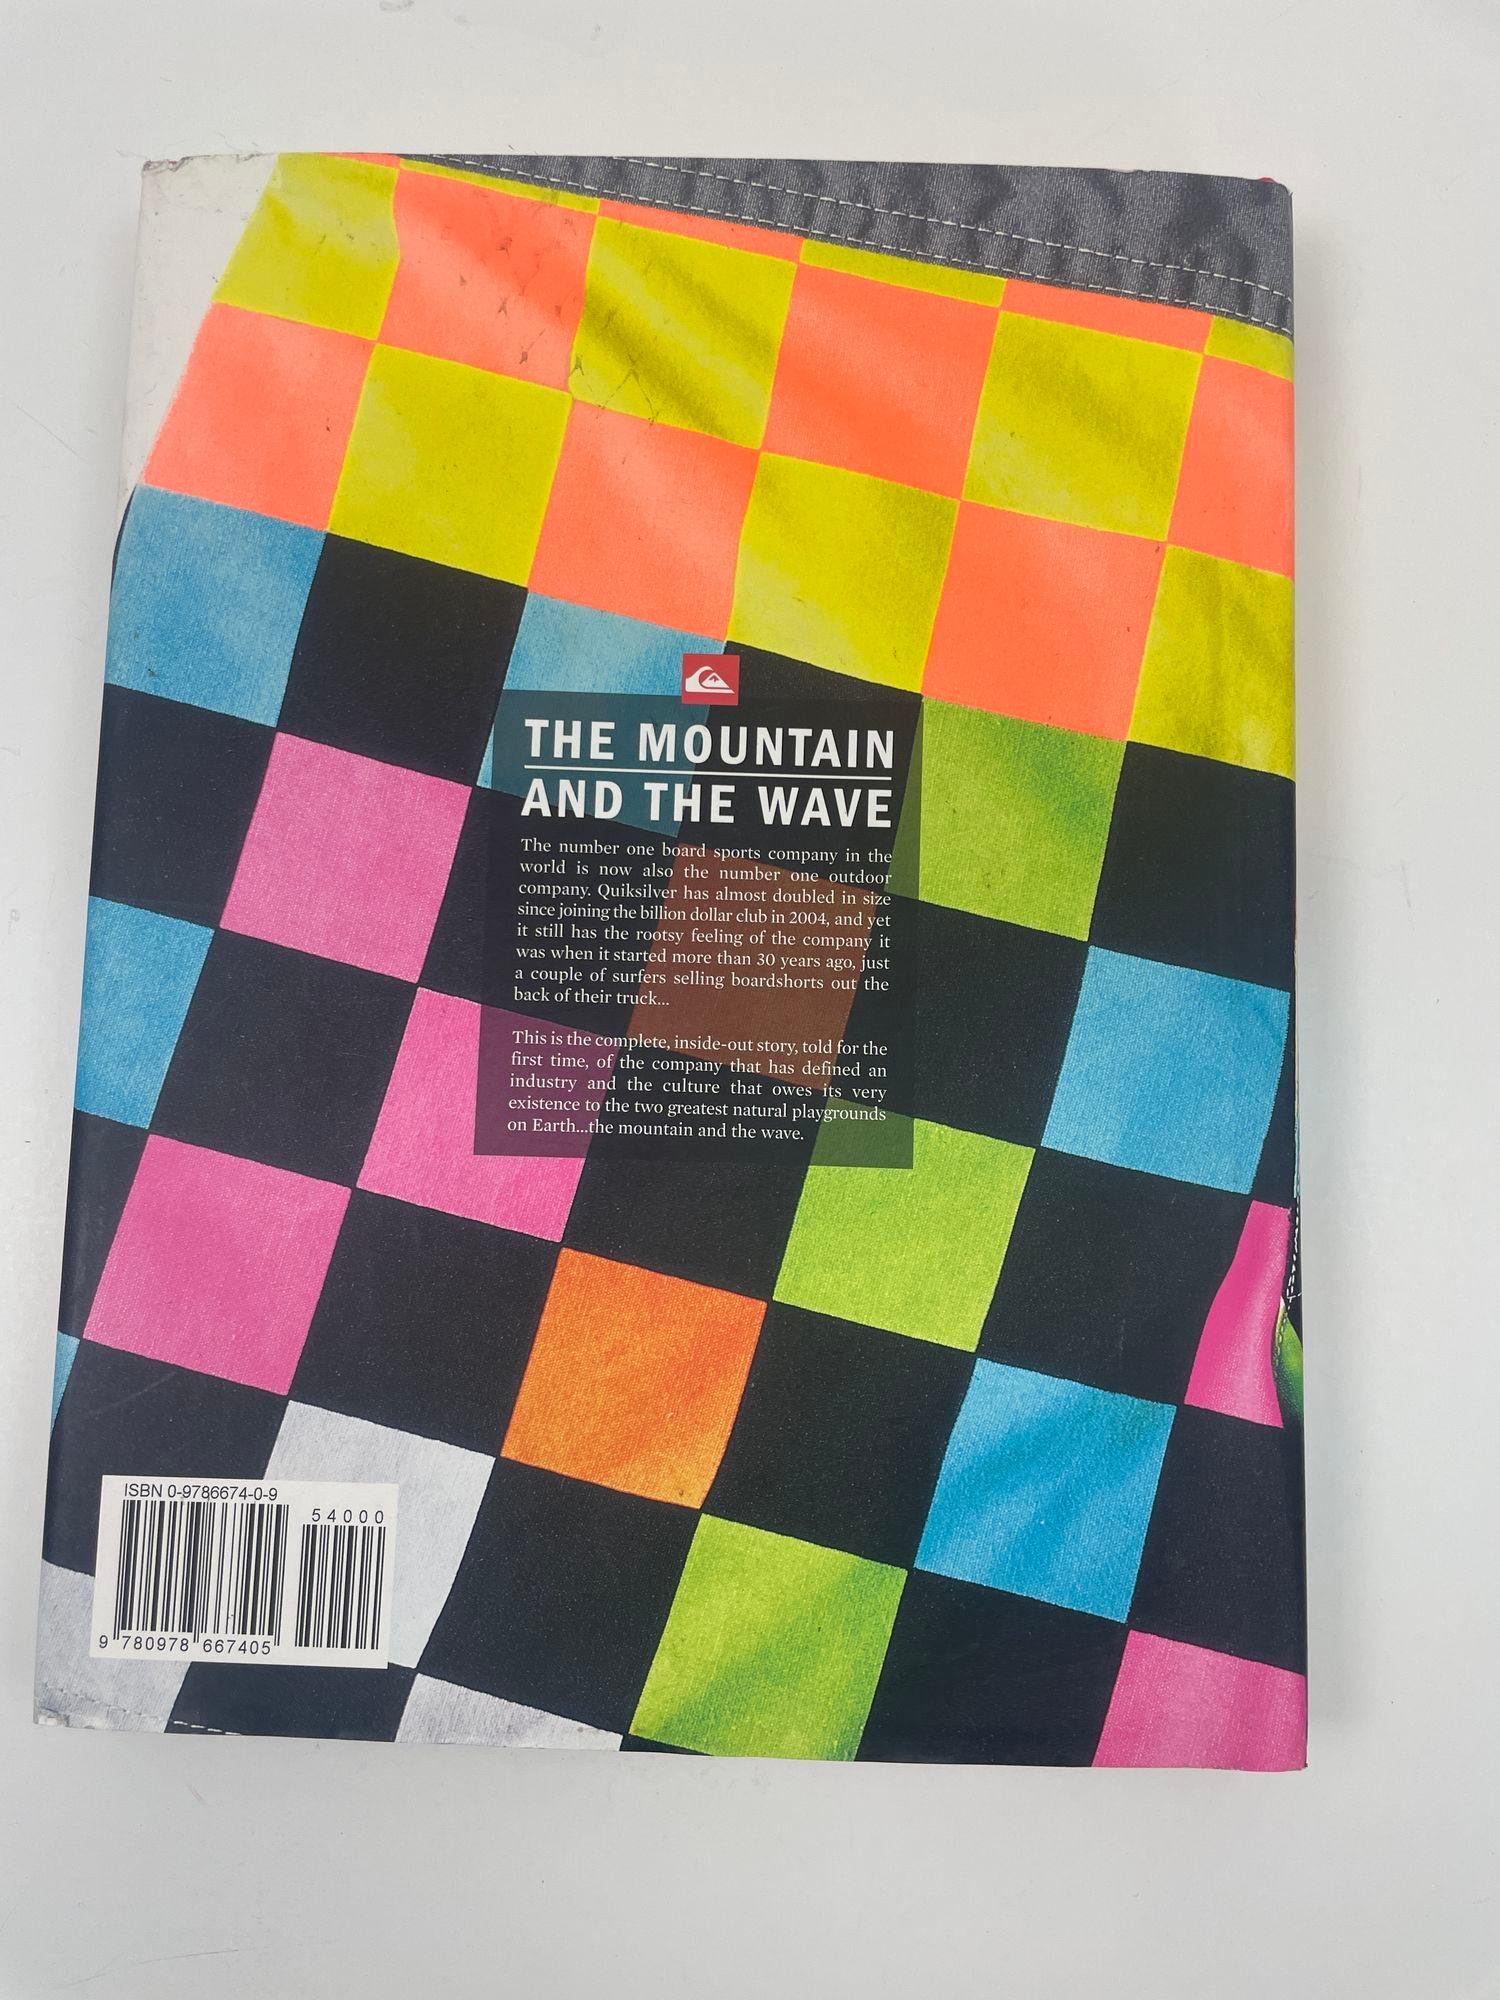 The Mountain and the Wave: The Quiksilver Story Hardcover Book January 1, 2006 by Phil Jarratt.
Quiksilver's much anticipated 320-page, full color book “The Mountain & the Wave, The Quiksilver Story” is now available!. The book has arrived just in